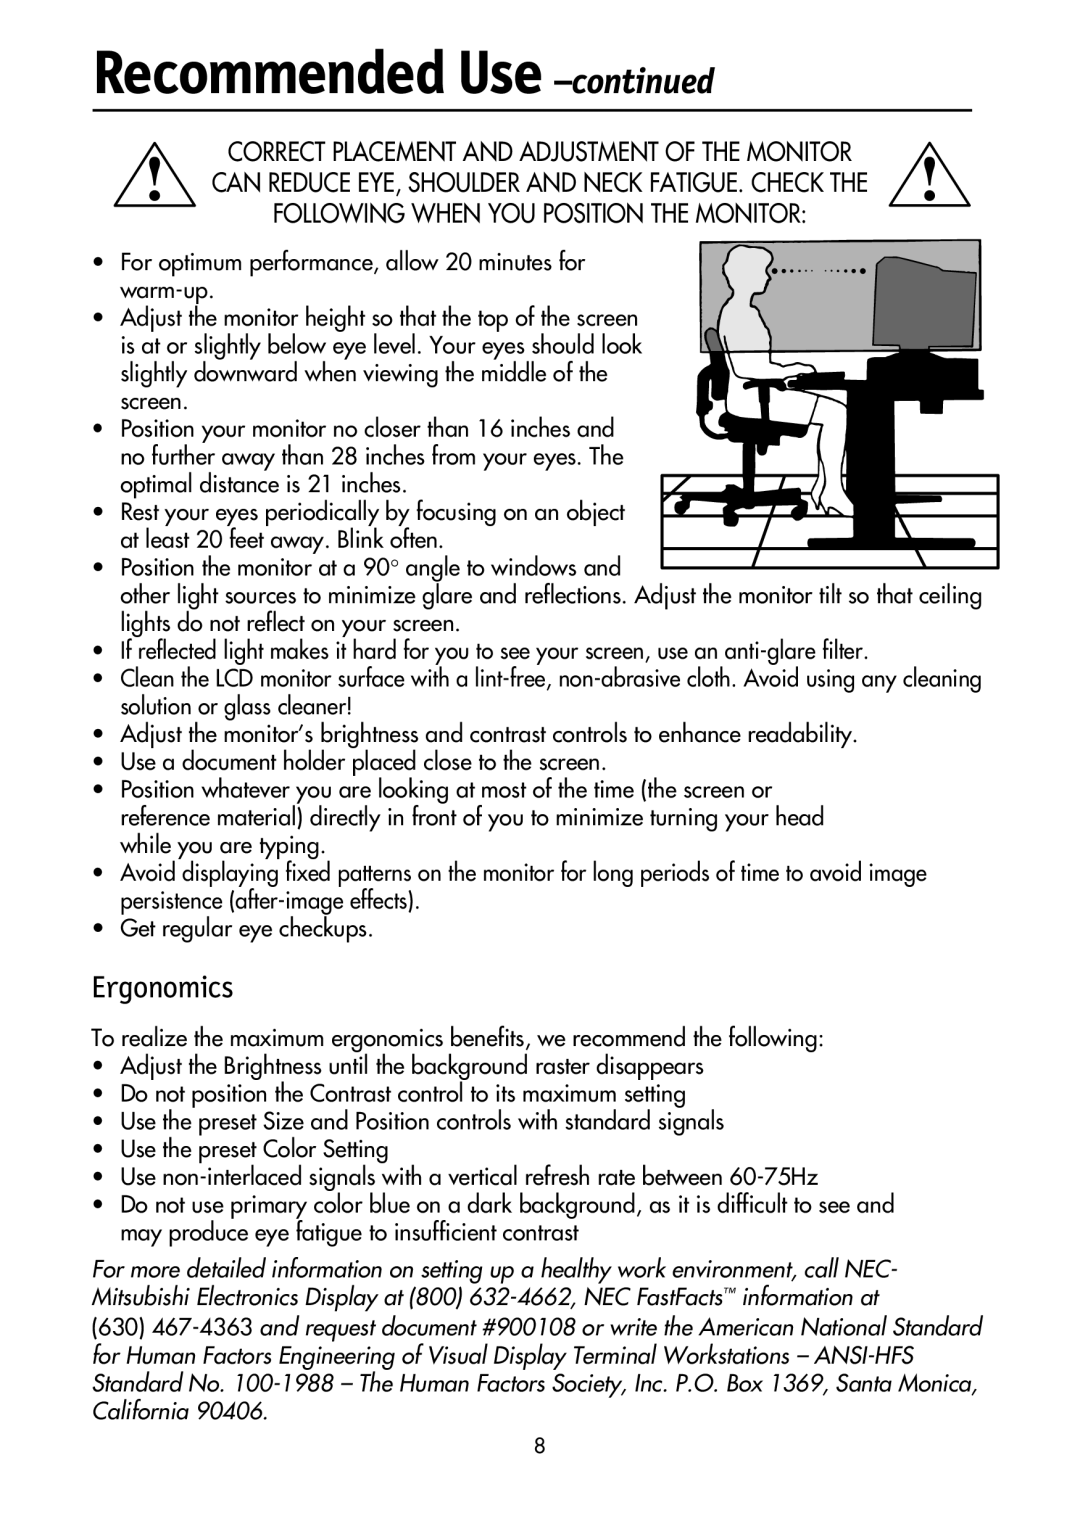 NEC LCD1700M user manual Recommended Use -continued, Ergonomics 